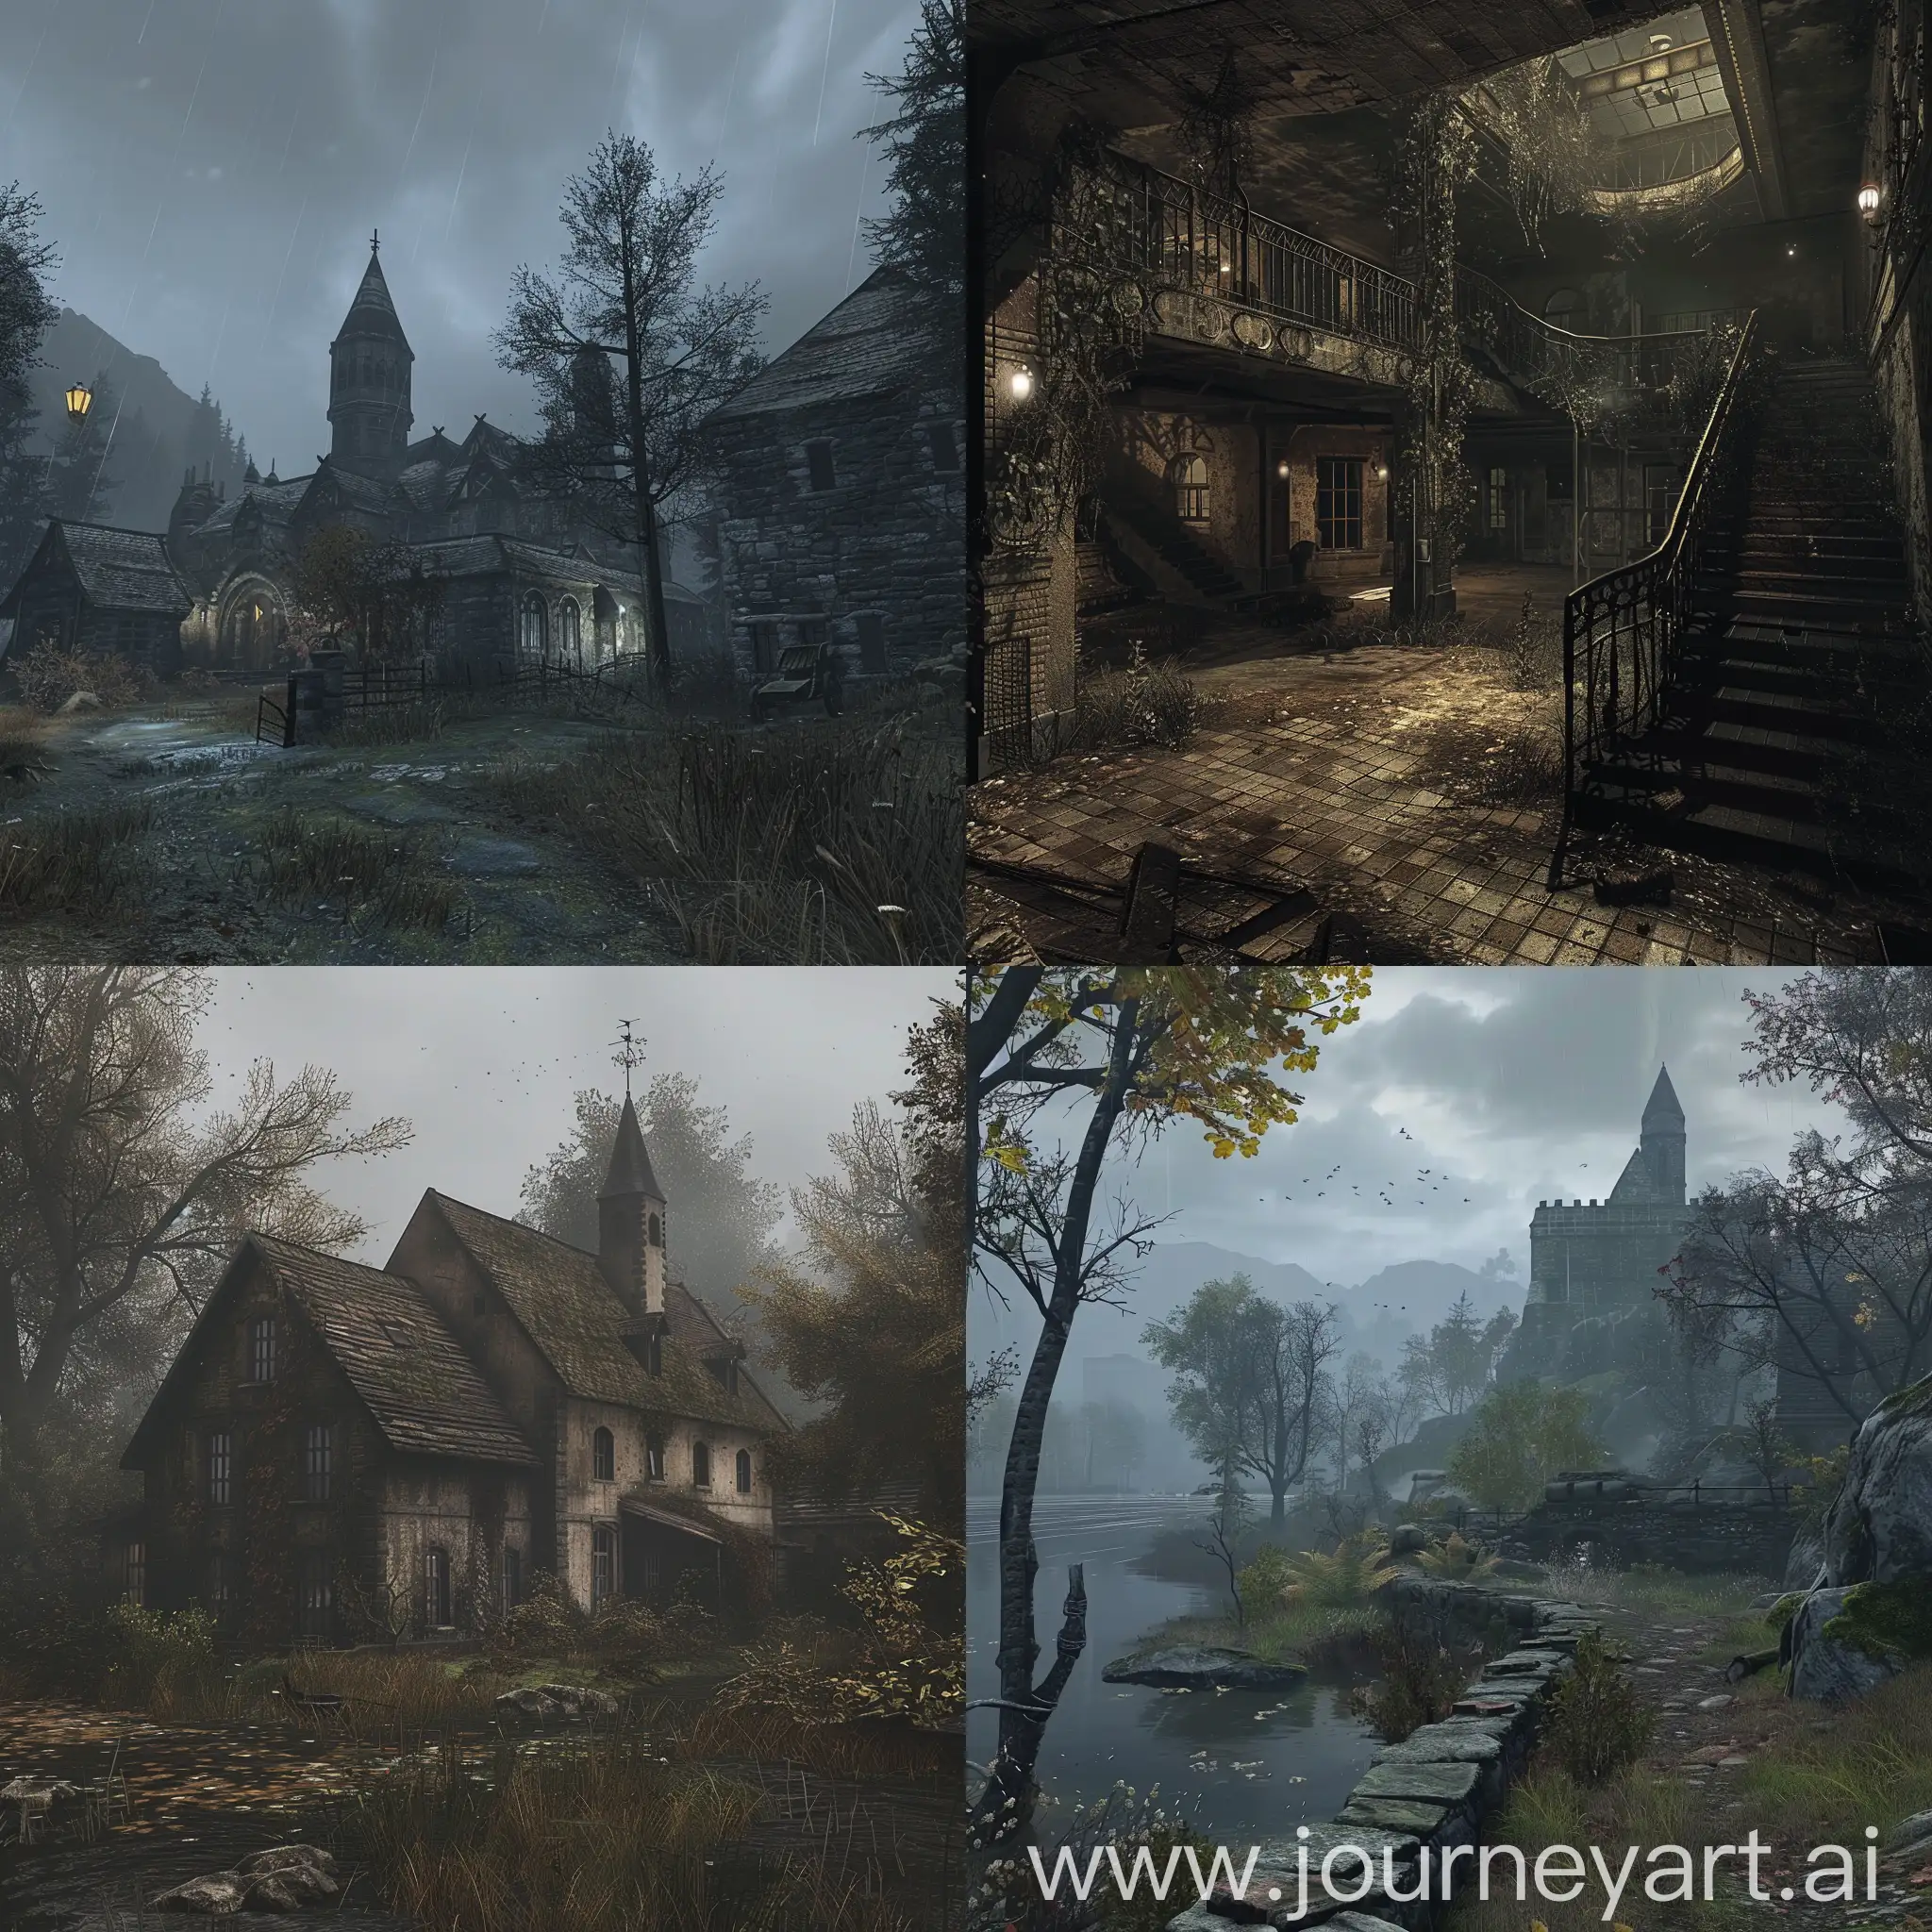  locations from the stalker game